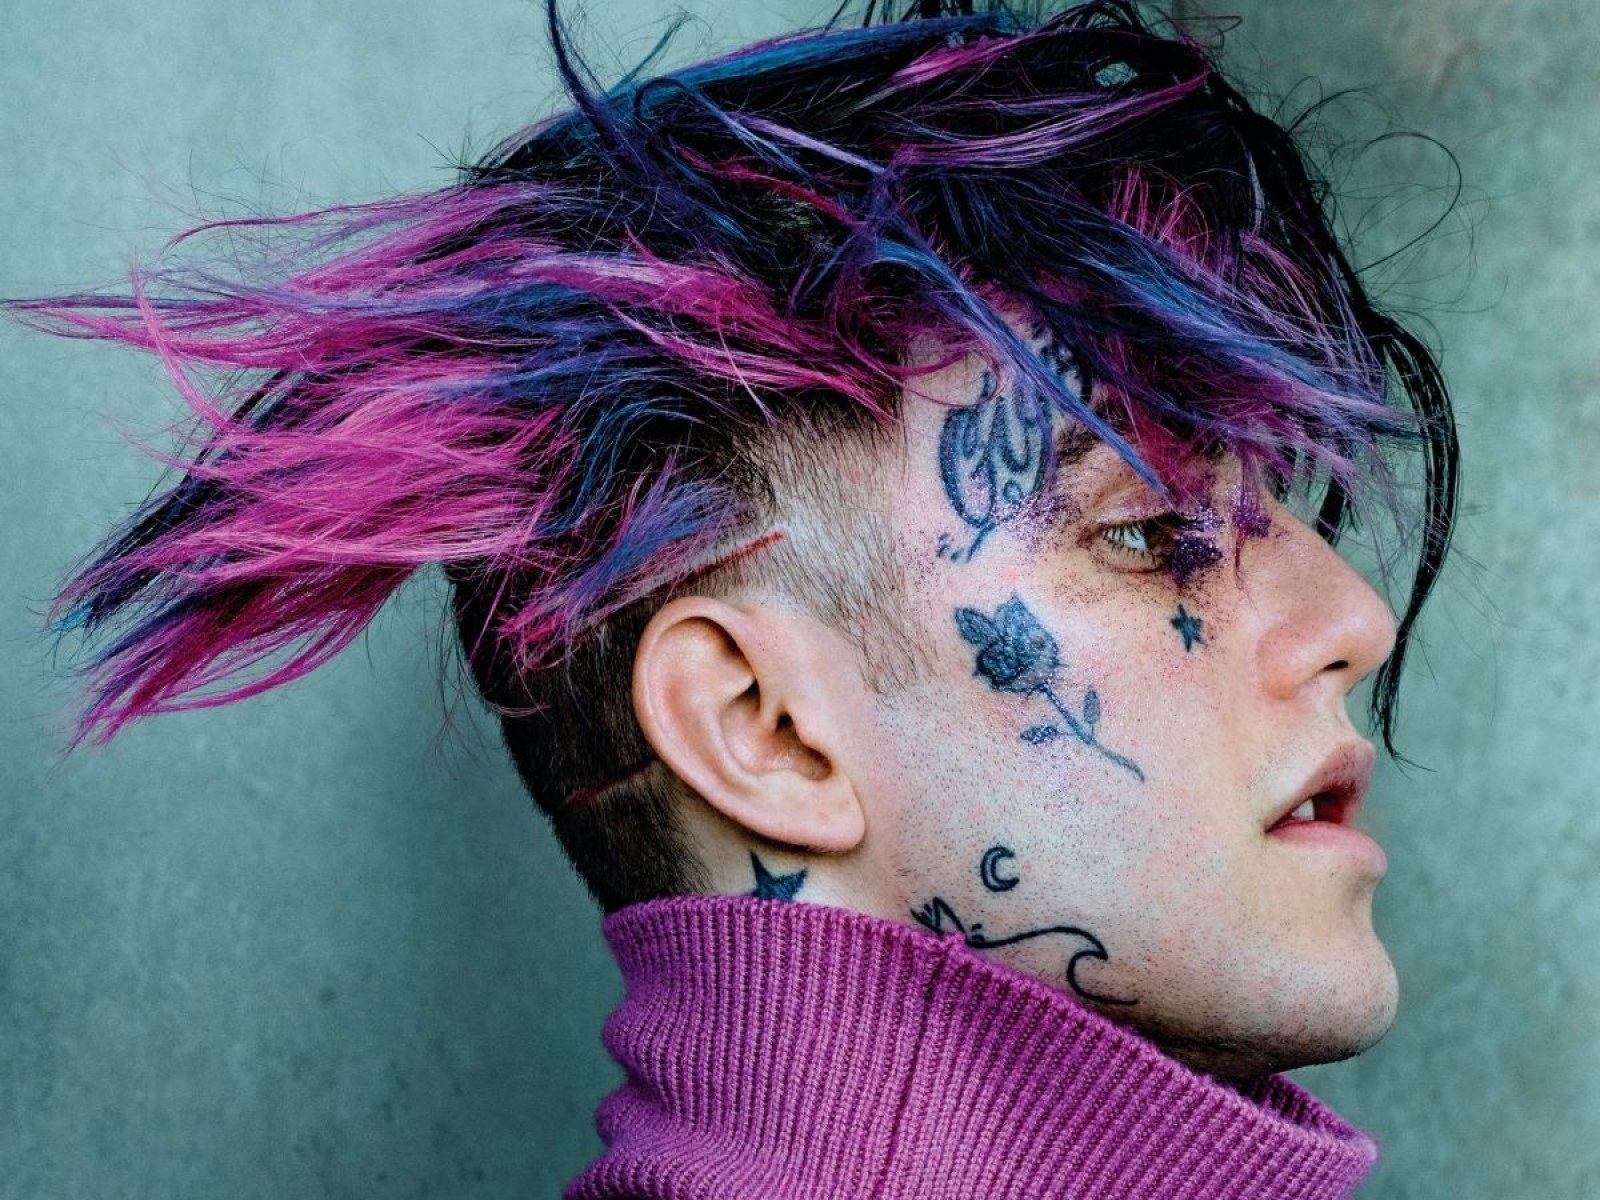 Why Lil Peep's Music Mattered in Trump's America